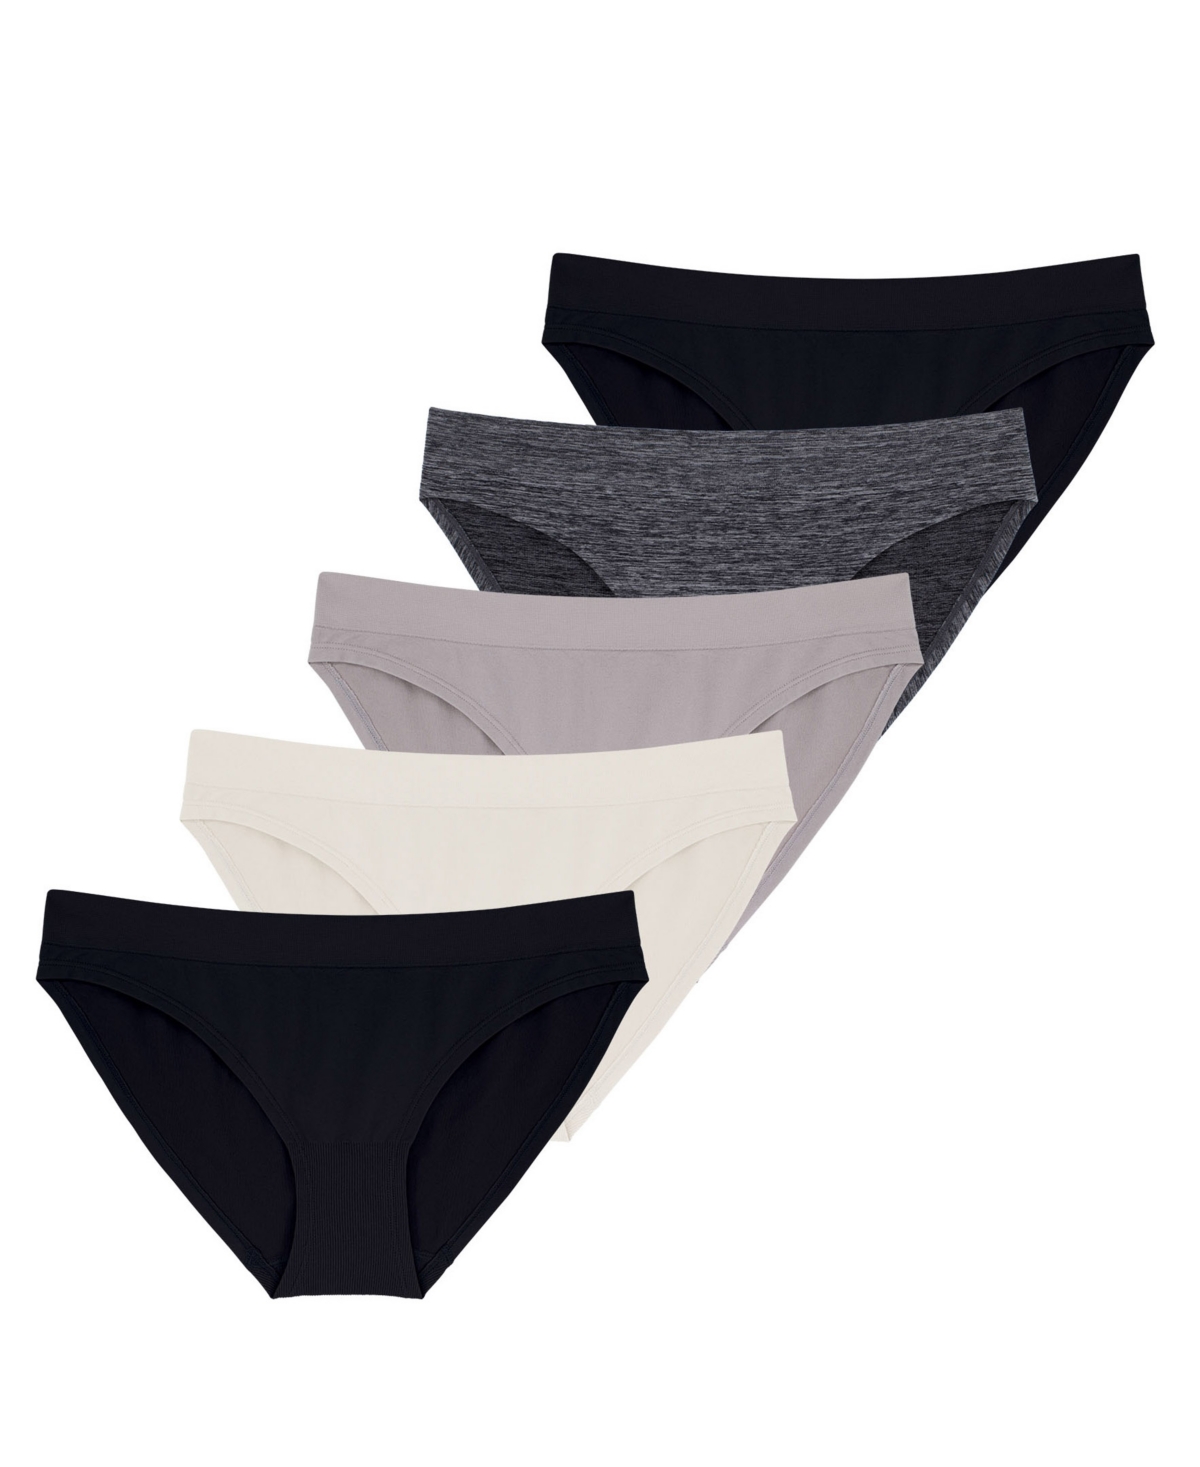 Women's Rosanne 5 Pack Seamless Soft Touch Fabric Brief Panties - Black, Beige, Gray, Gray, Black